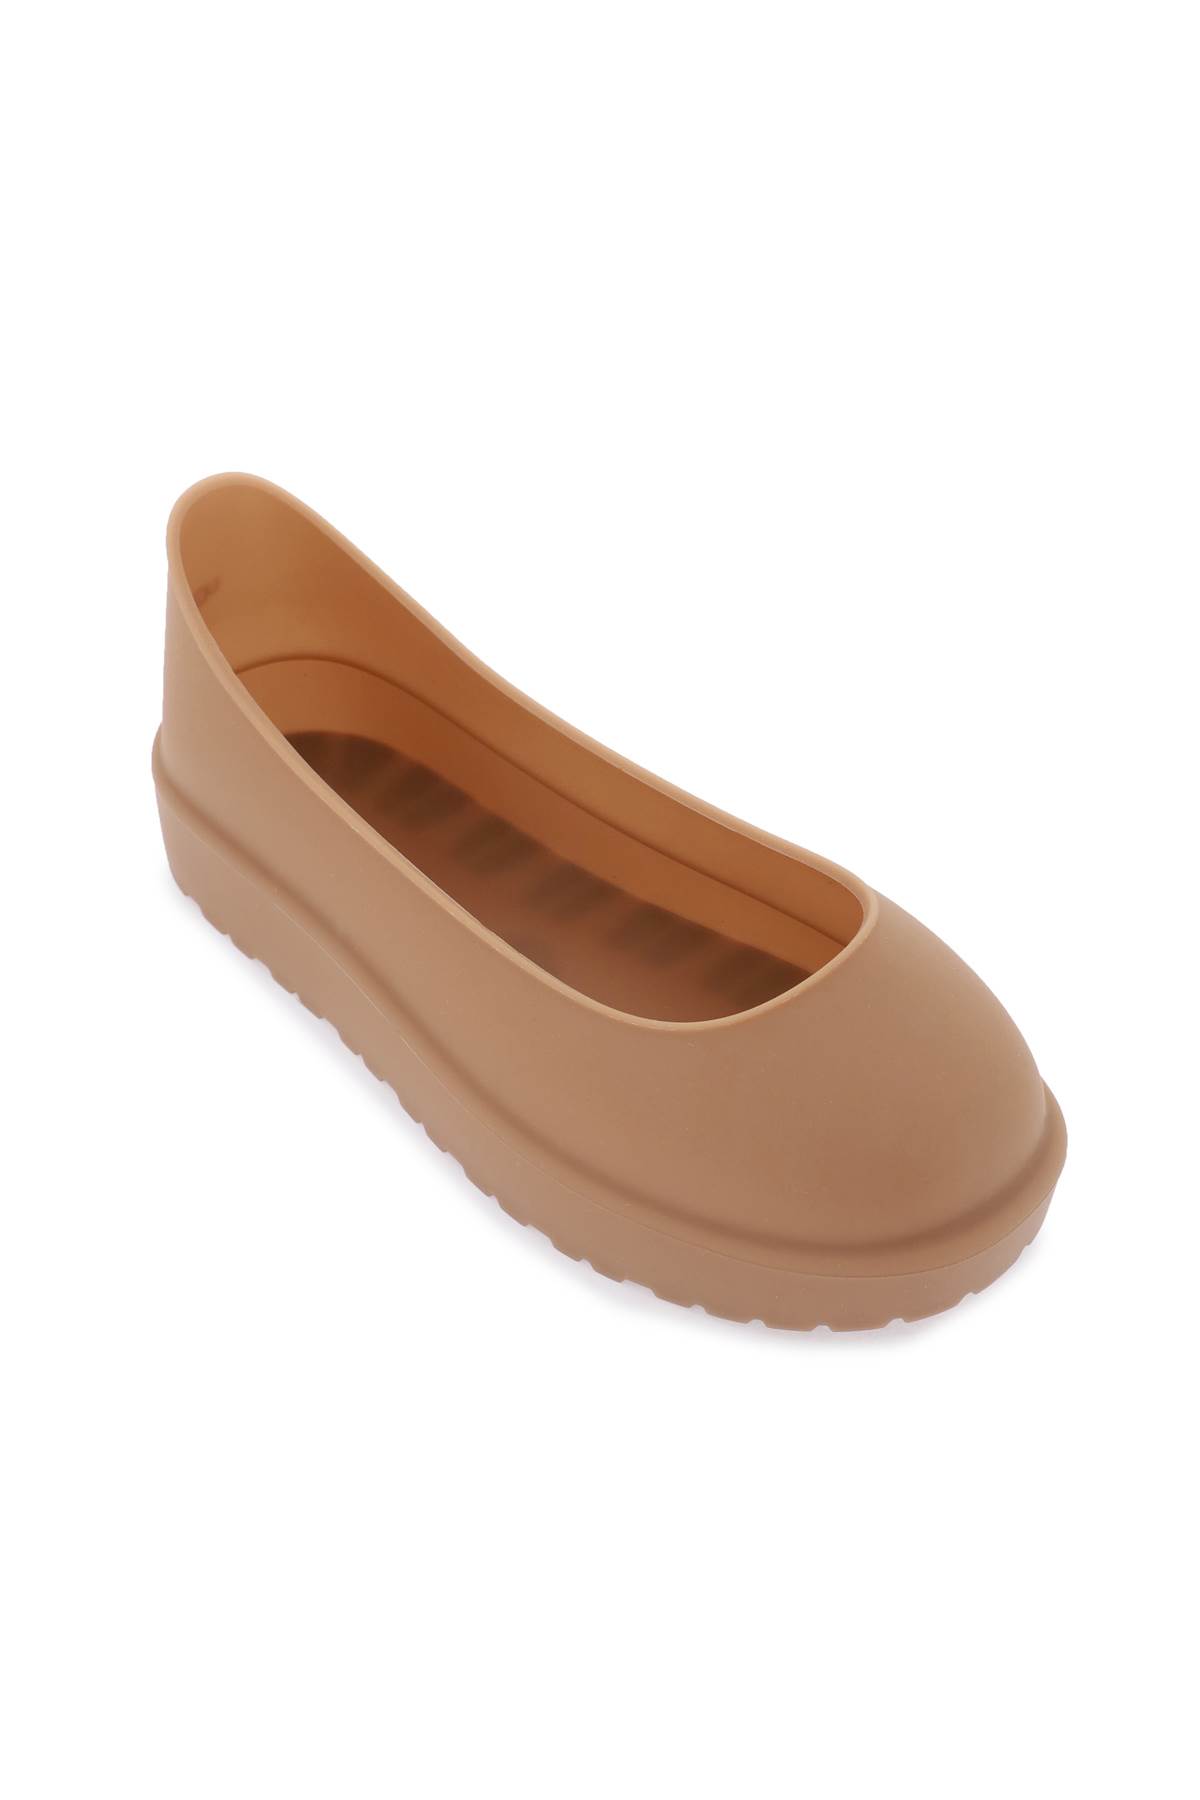 Shop Ugg Guard Shoe Protection In Beige